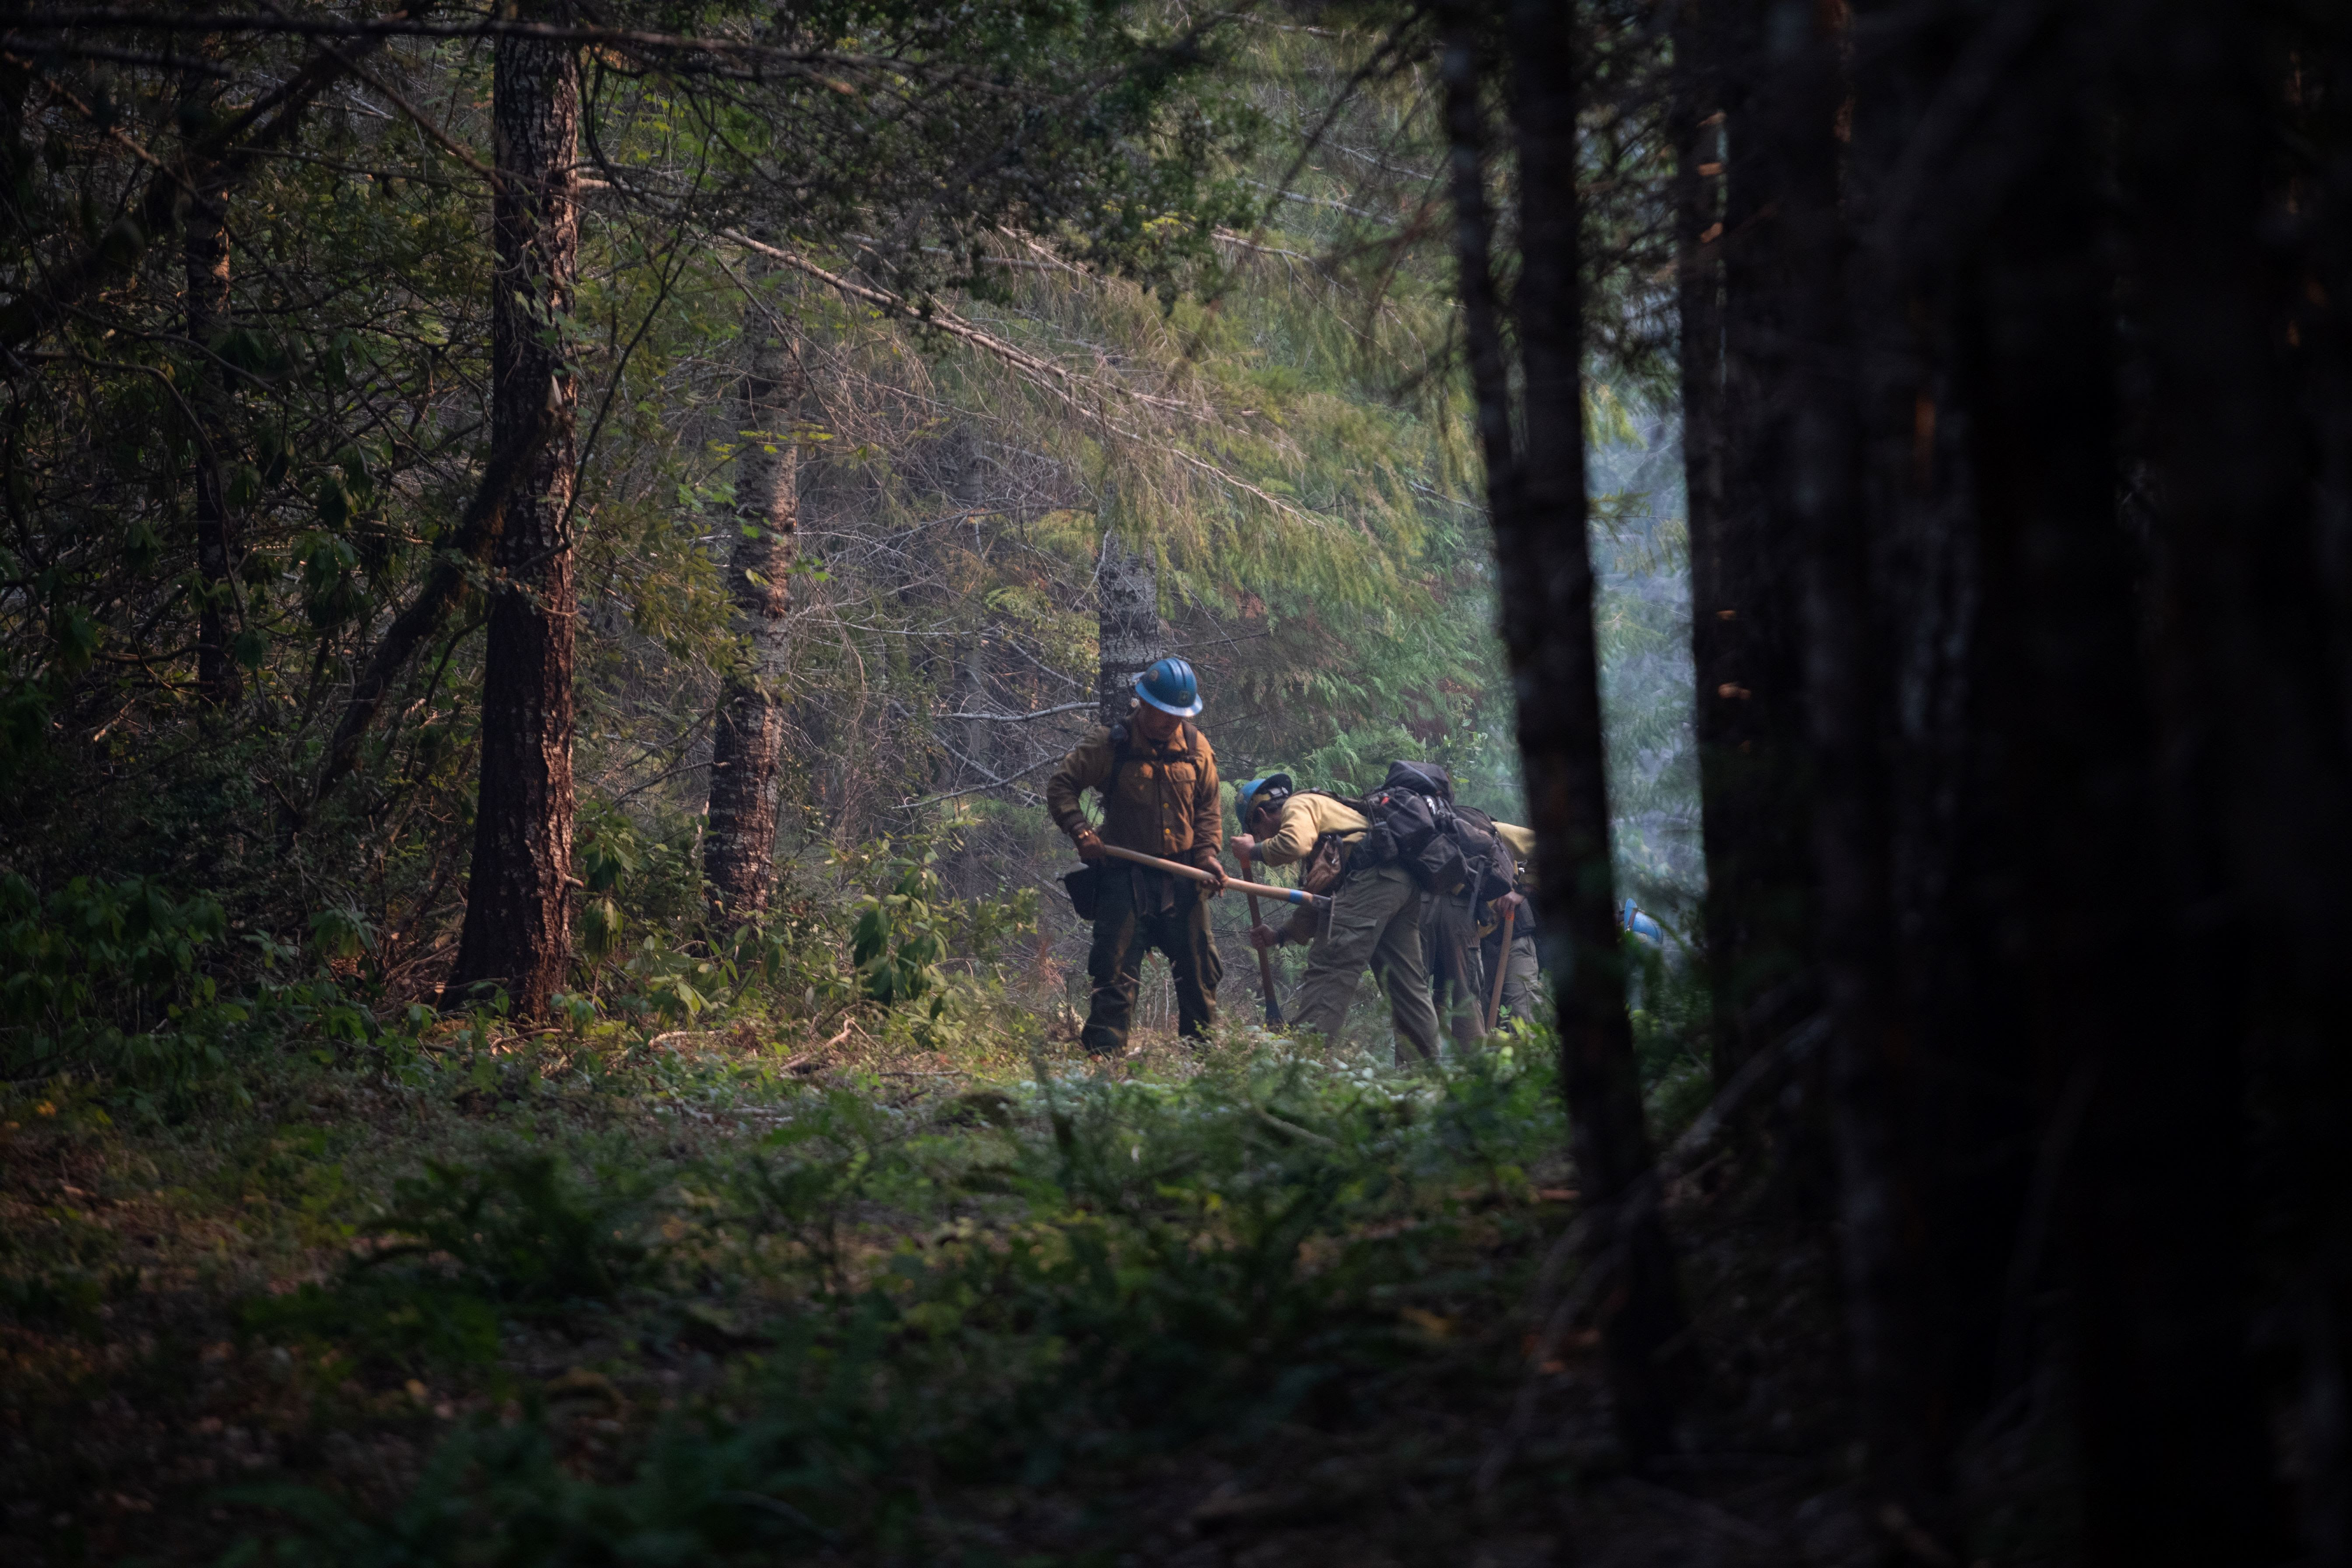 Firefighters use pickaxes clearing between trees.